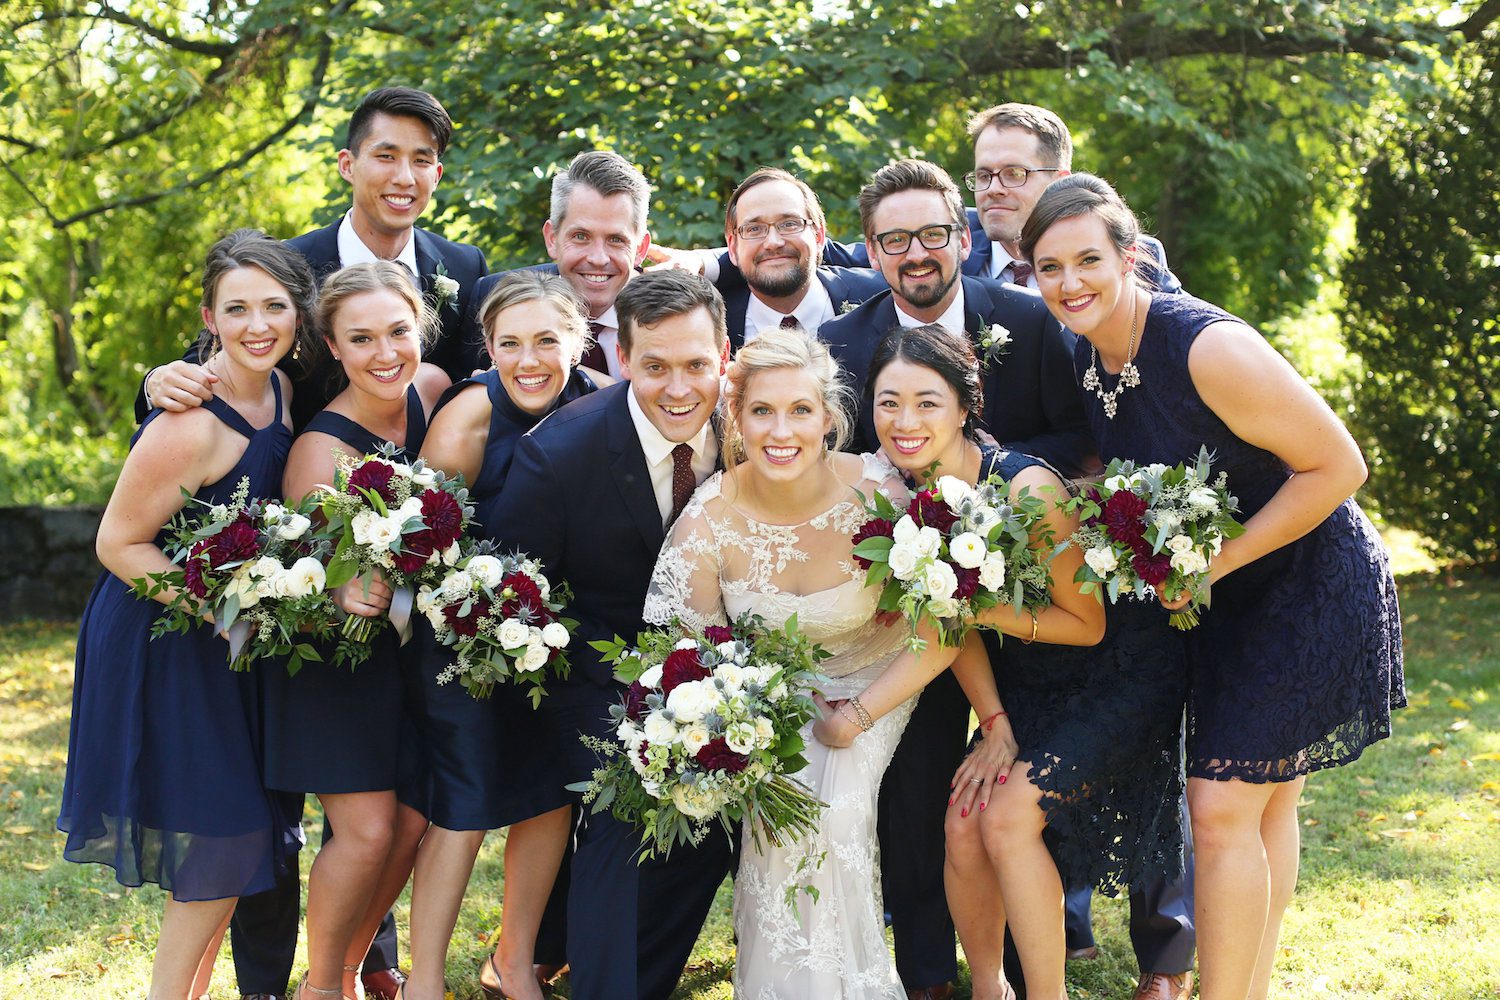 Jordan and Madeleine Bullard and their wedding party. Artwork by Jessica Smith Photography.